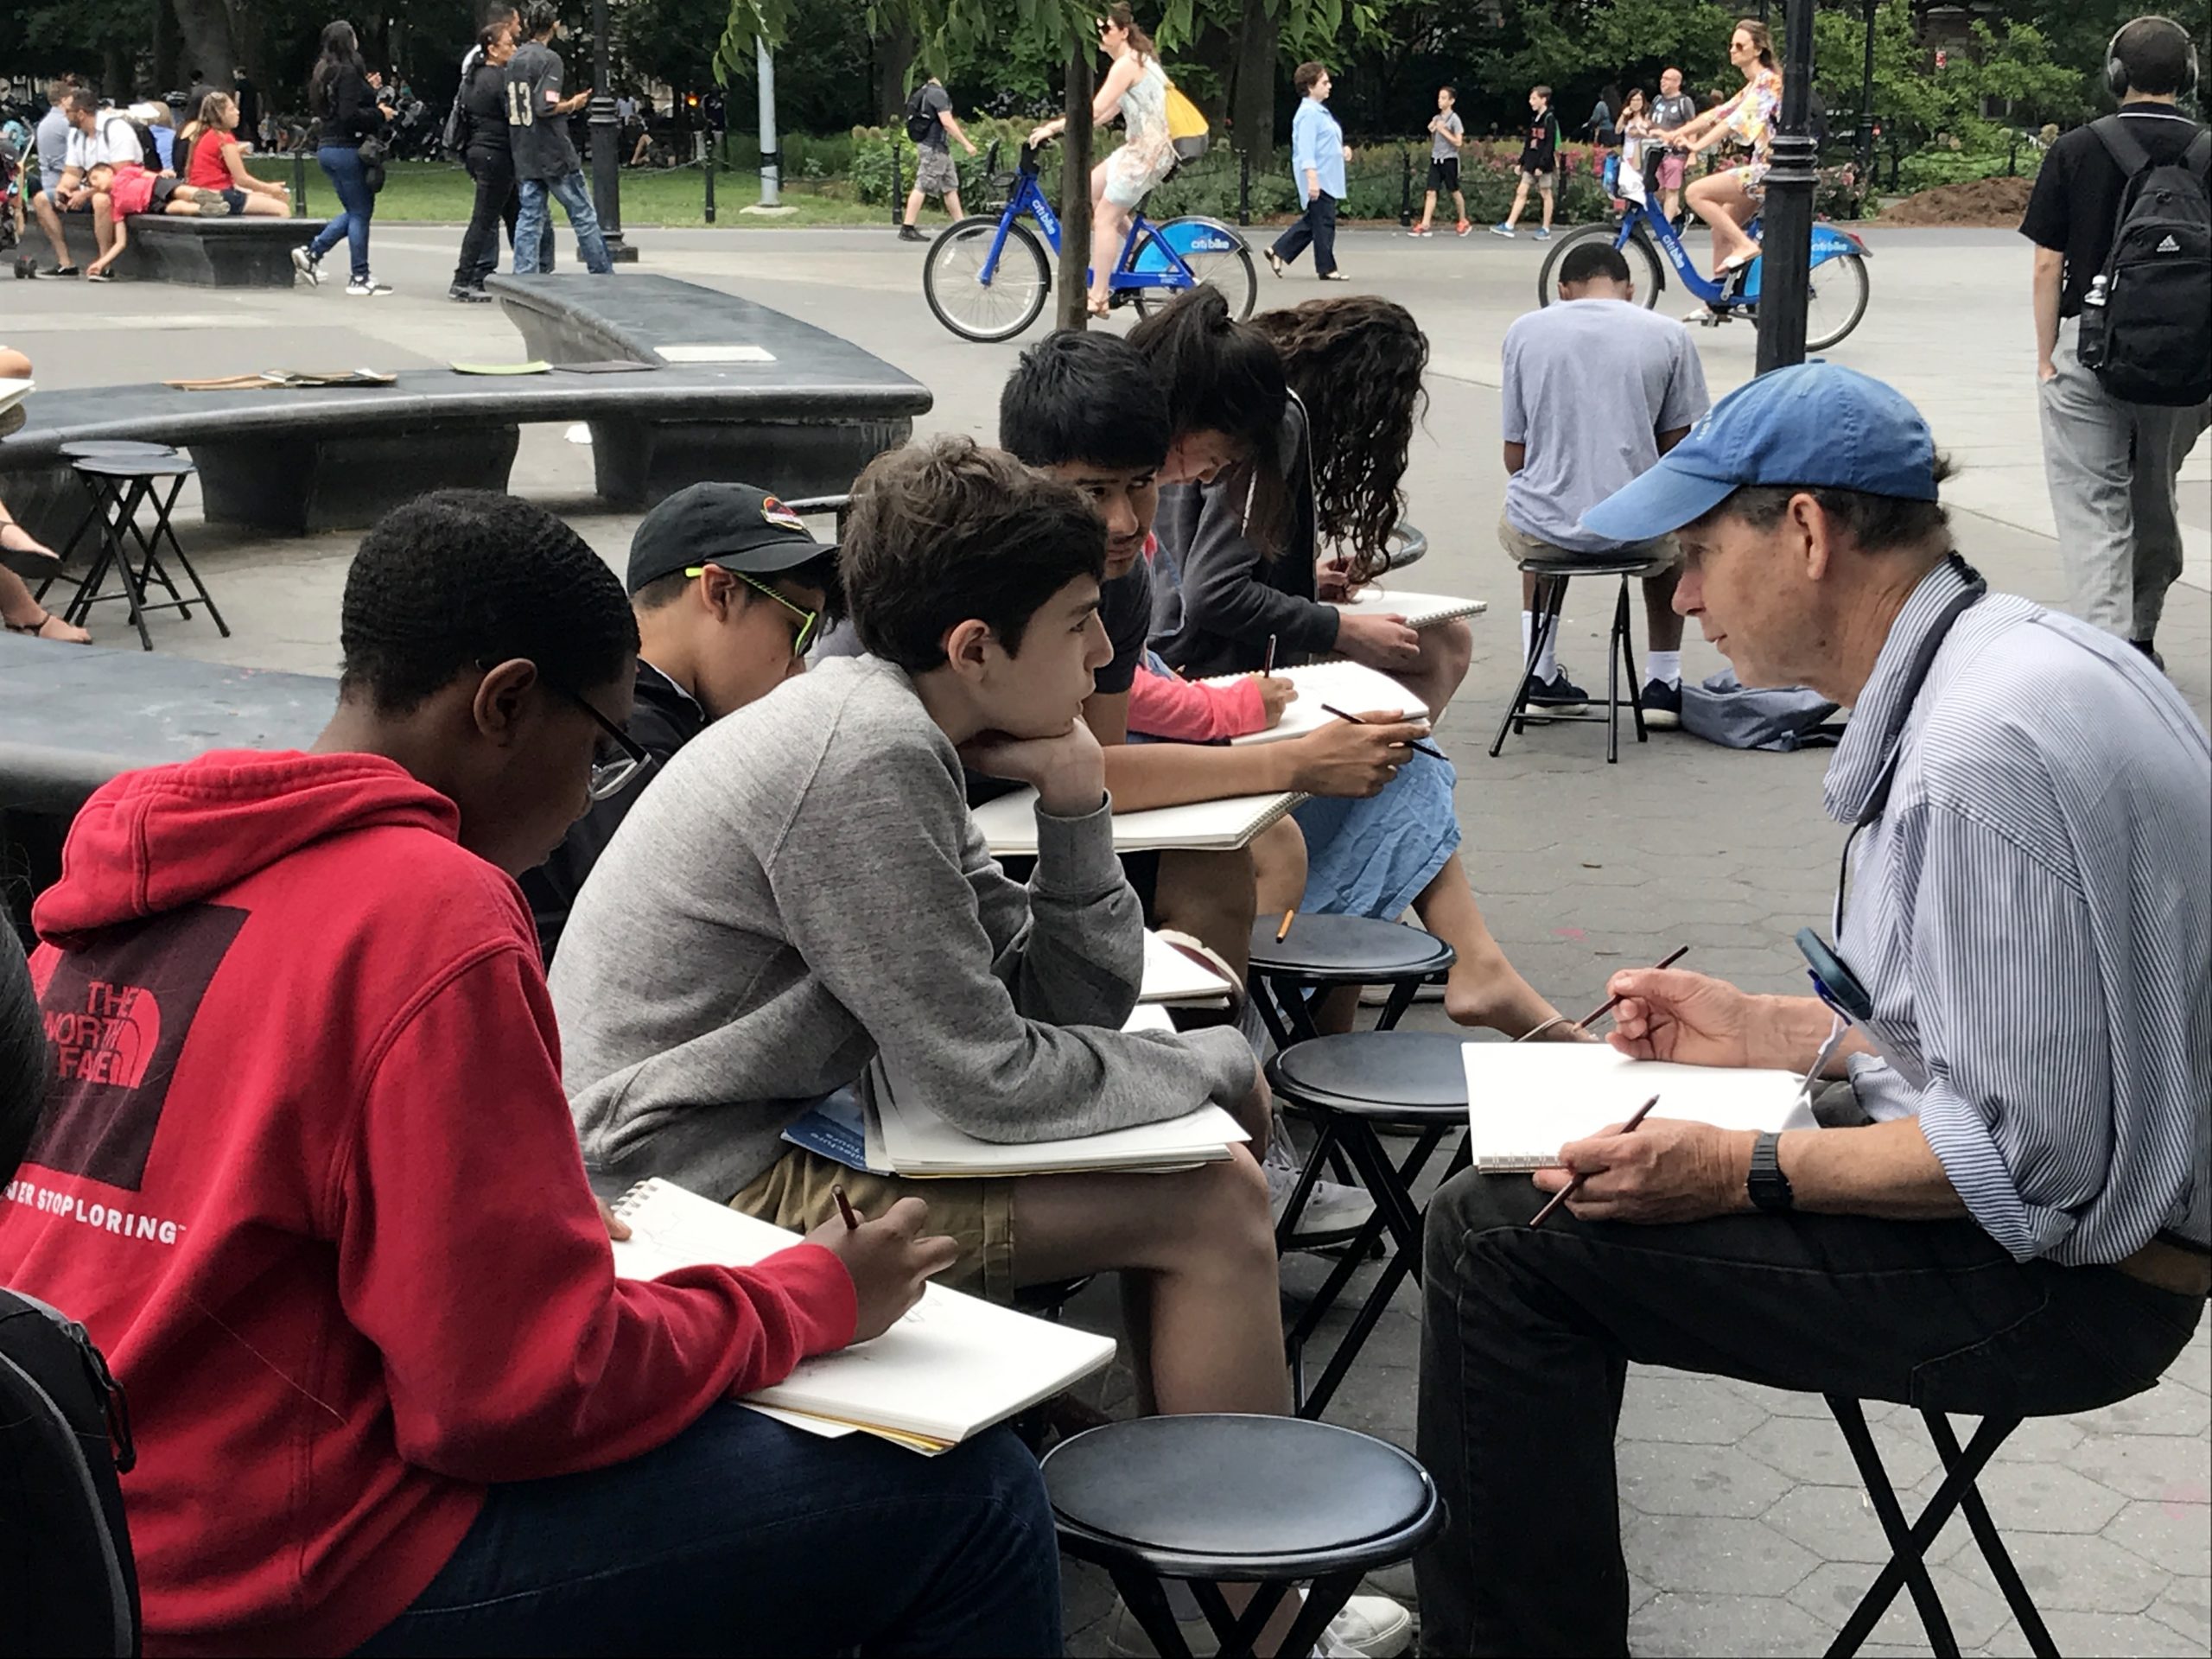 High school students sketching outside